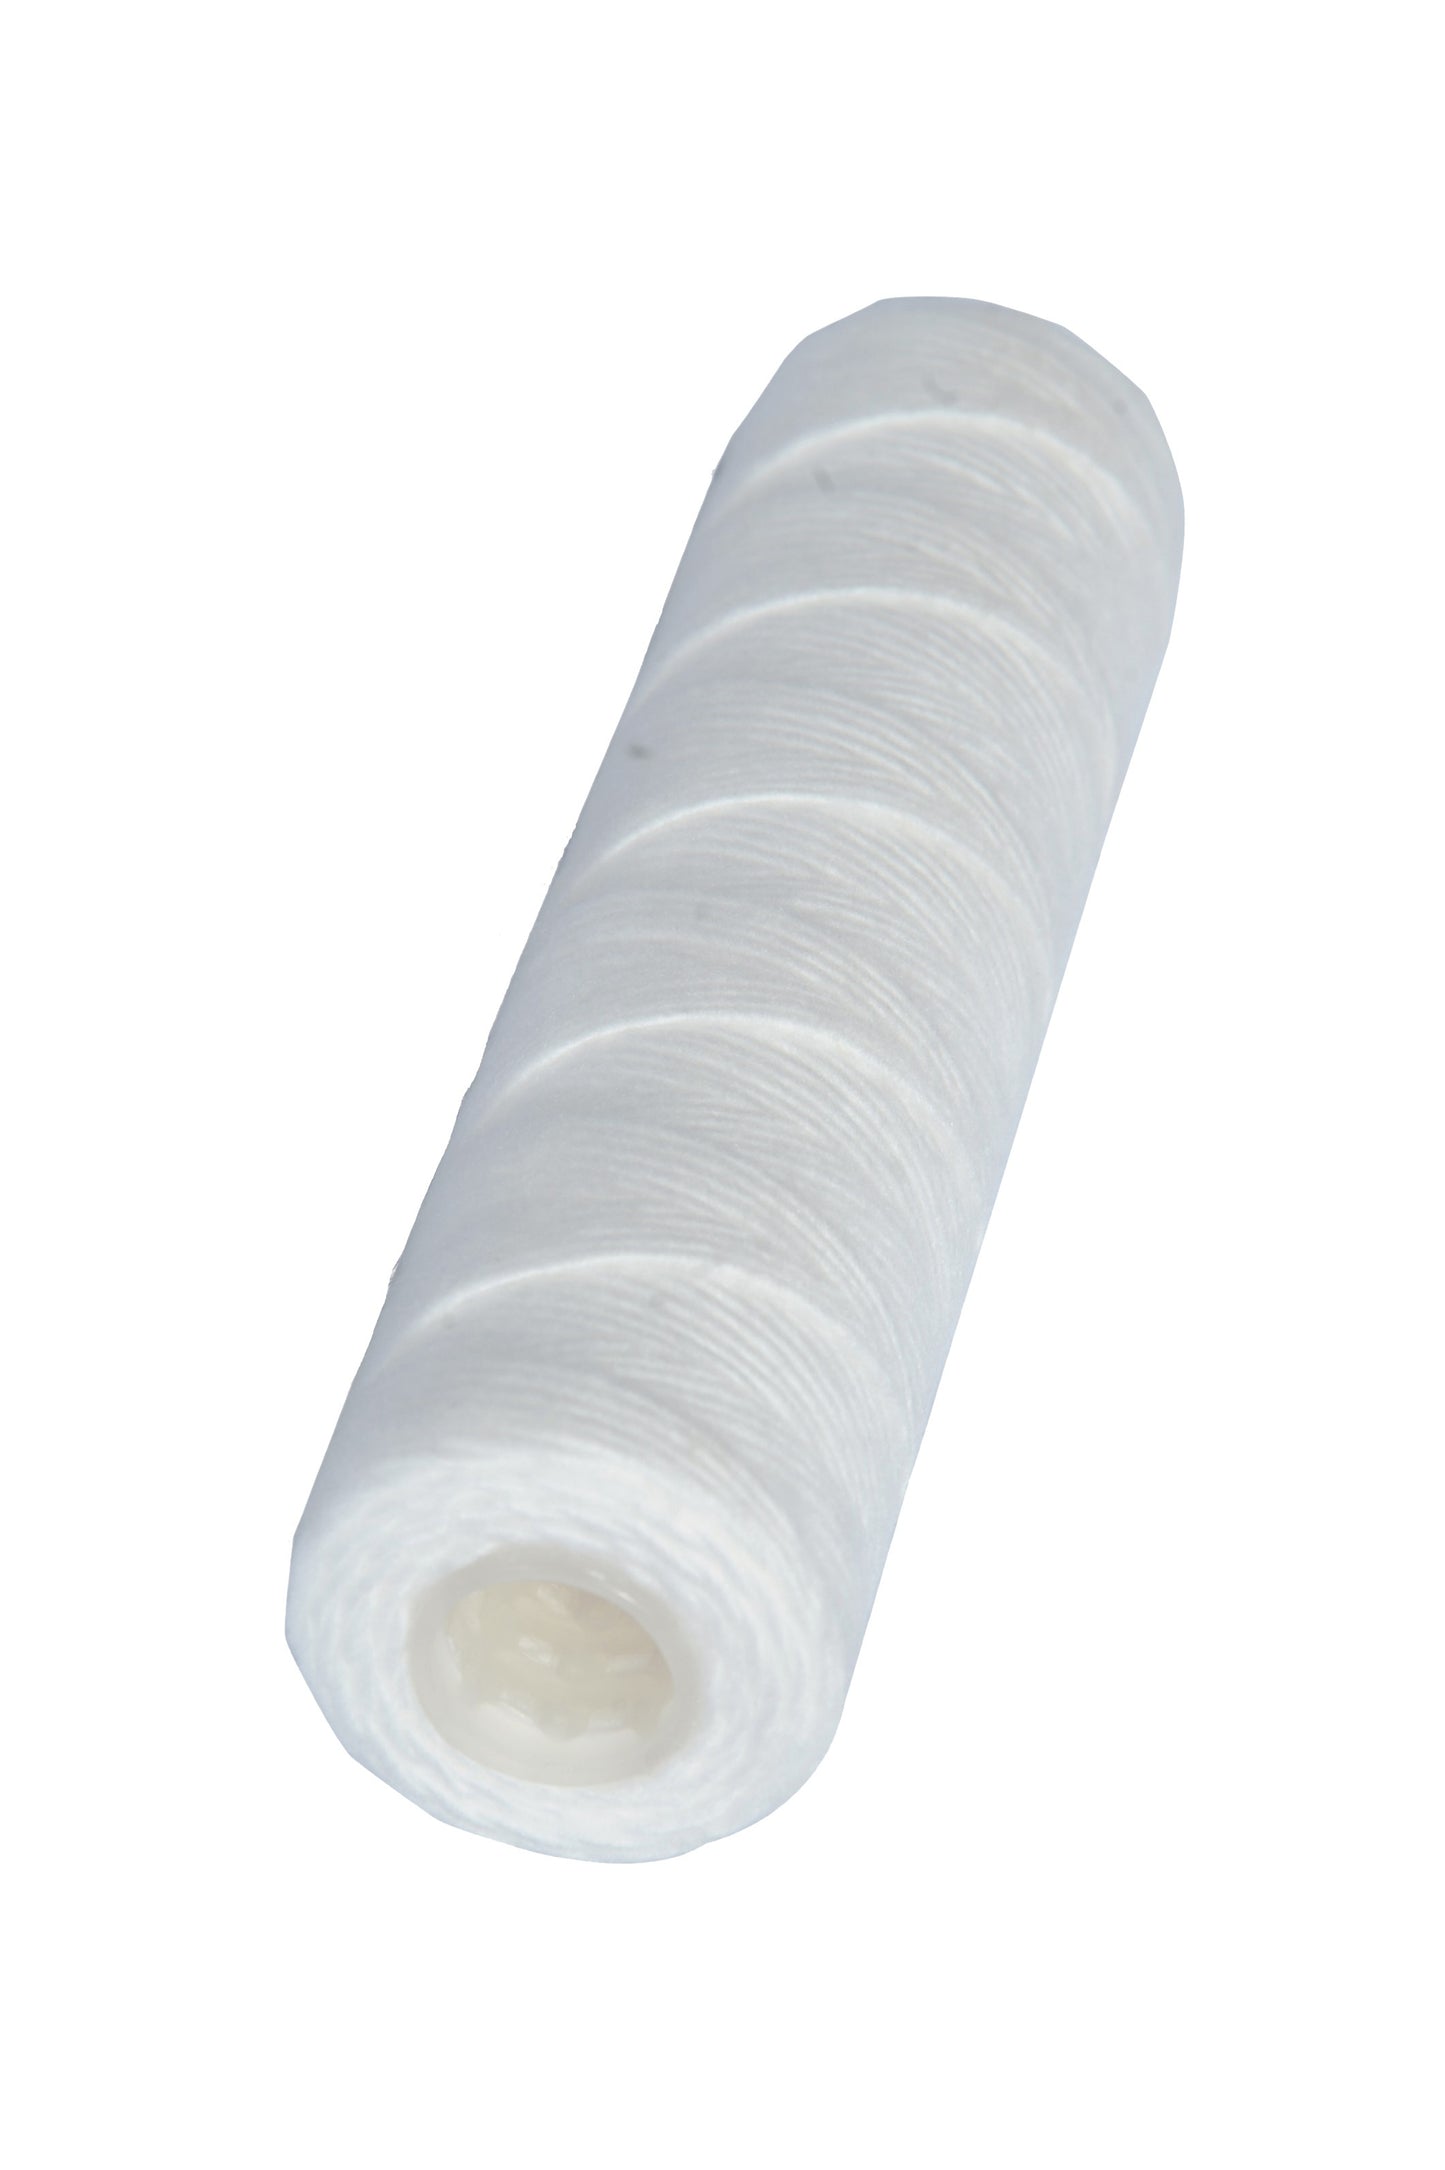 PreRO Yarn Wounded Replacement Filter Cartridge for prefilter (10 Inch, 5 Micron)